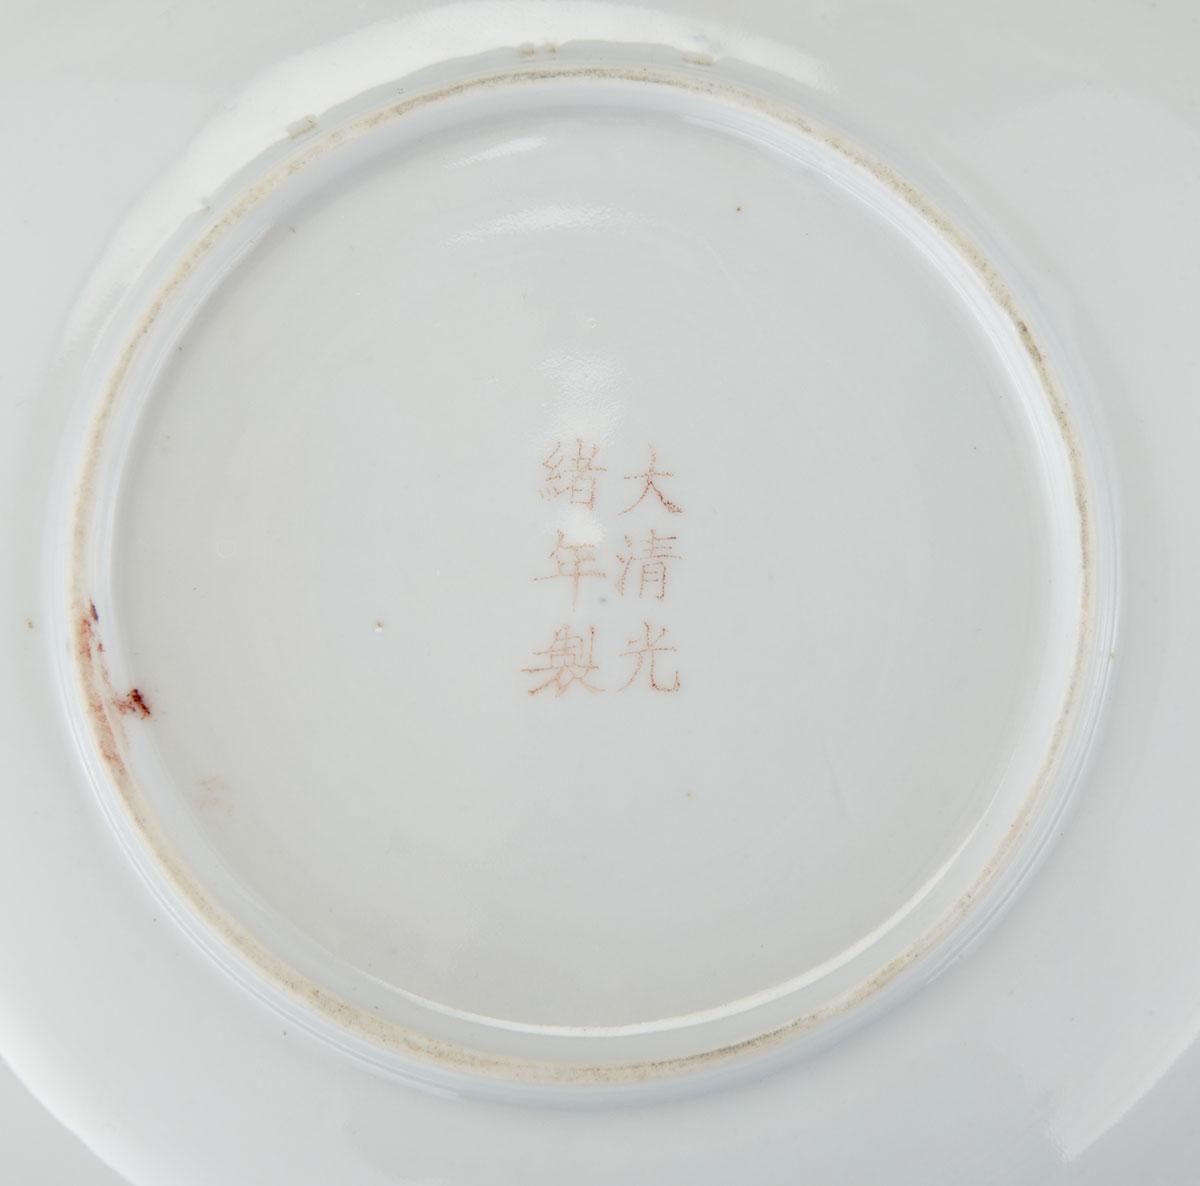 Three Famille Rose Saucers, Guangxu Mark and Late in the Period (1875-1908)